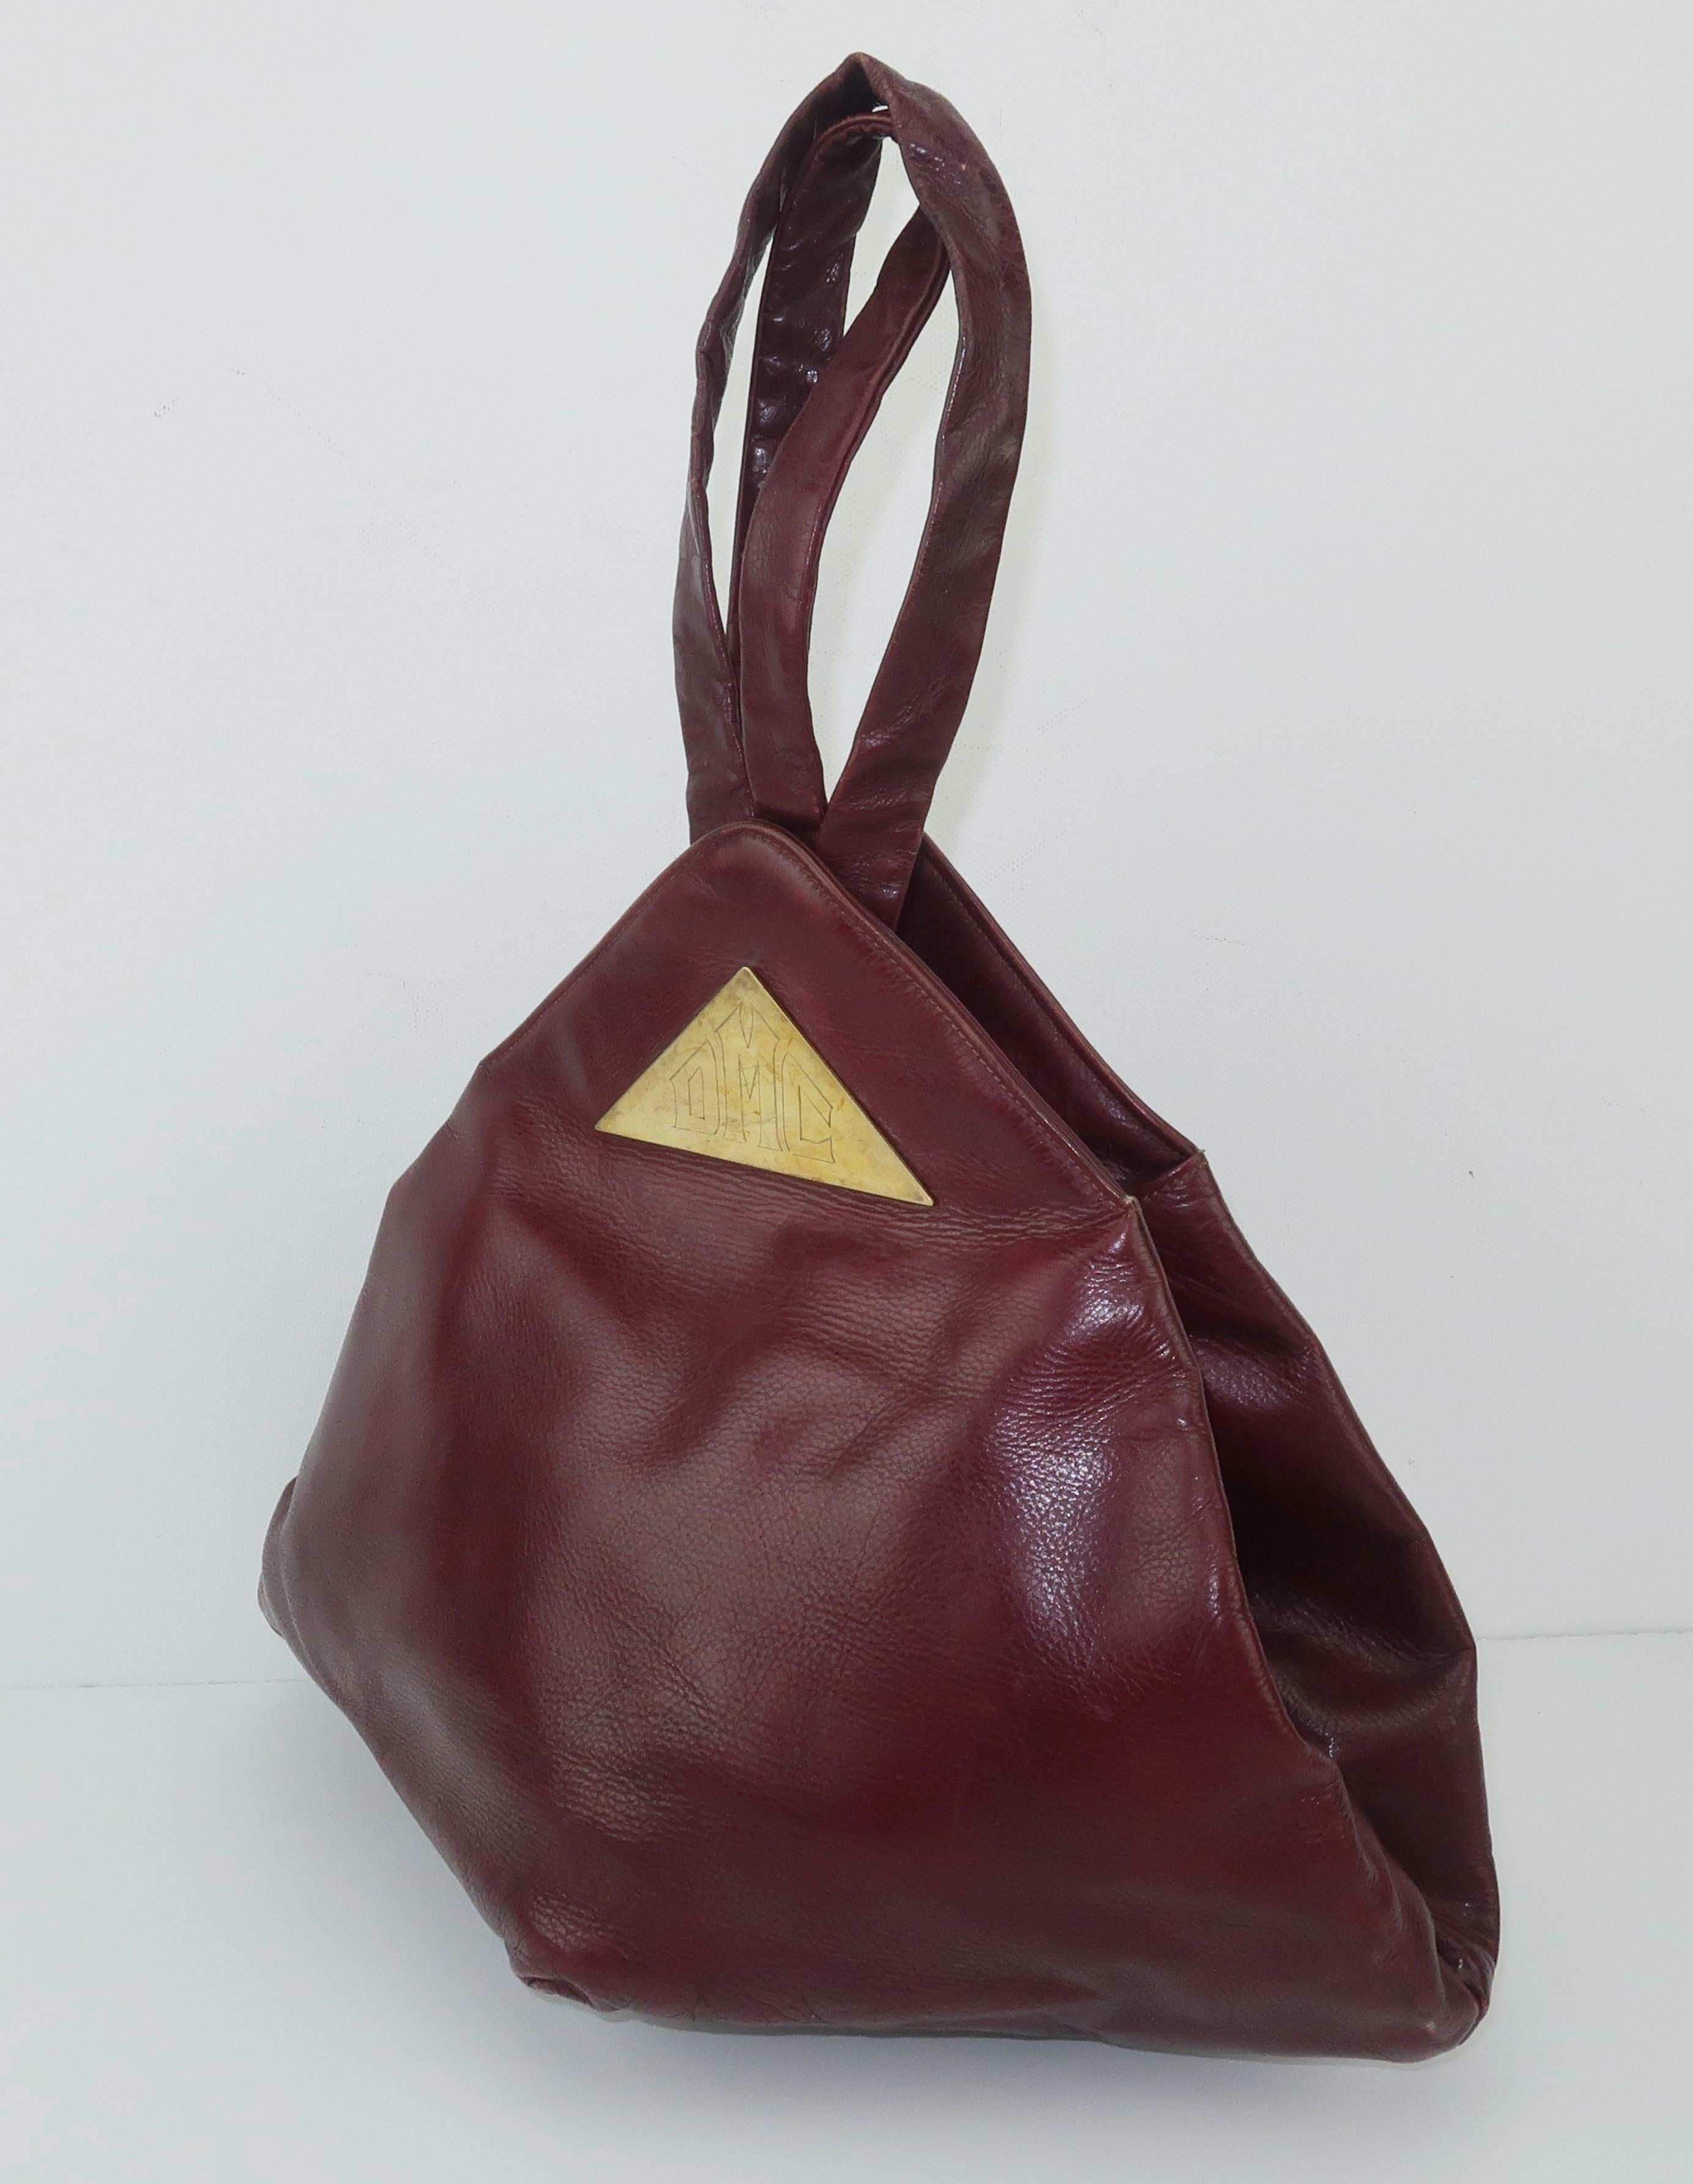 Depending on the angle, this C.1940 Harry Rosenfeld design looks like a triangle, a diamond or a hexagon ... from the sides, bottom and opening.  A closer look reveals that the oxblood color leather has a simple folded construction that works